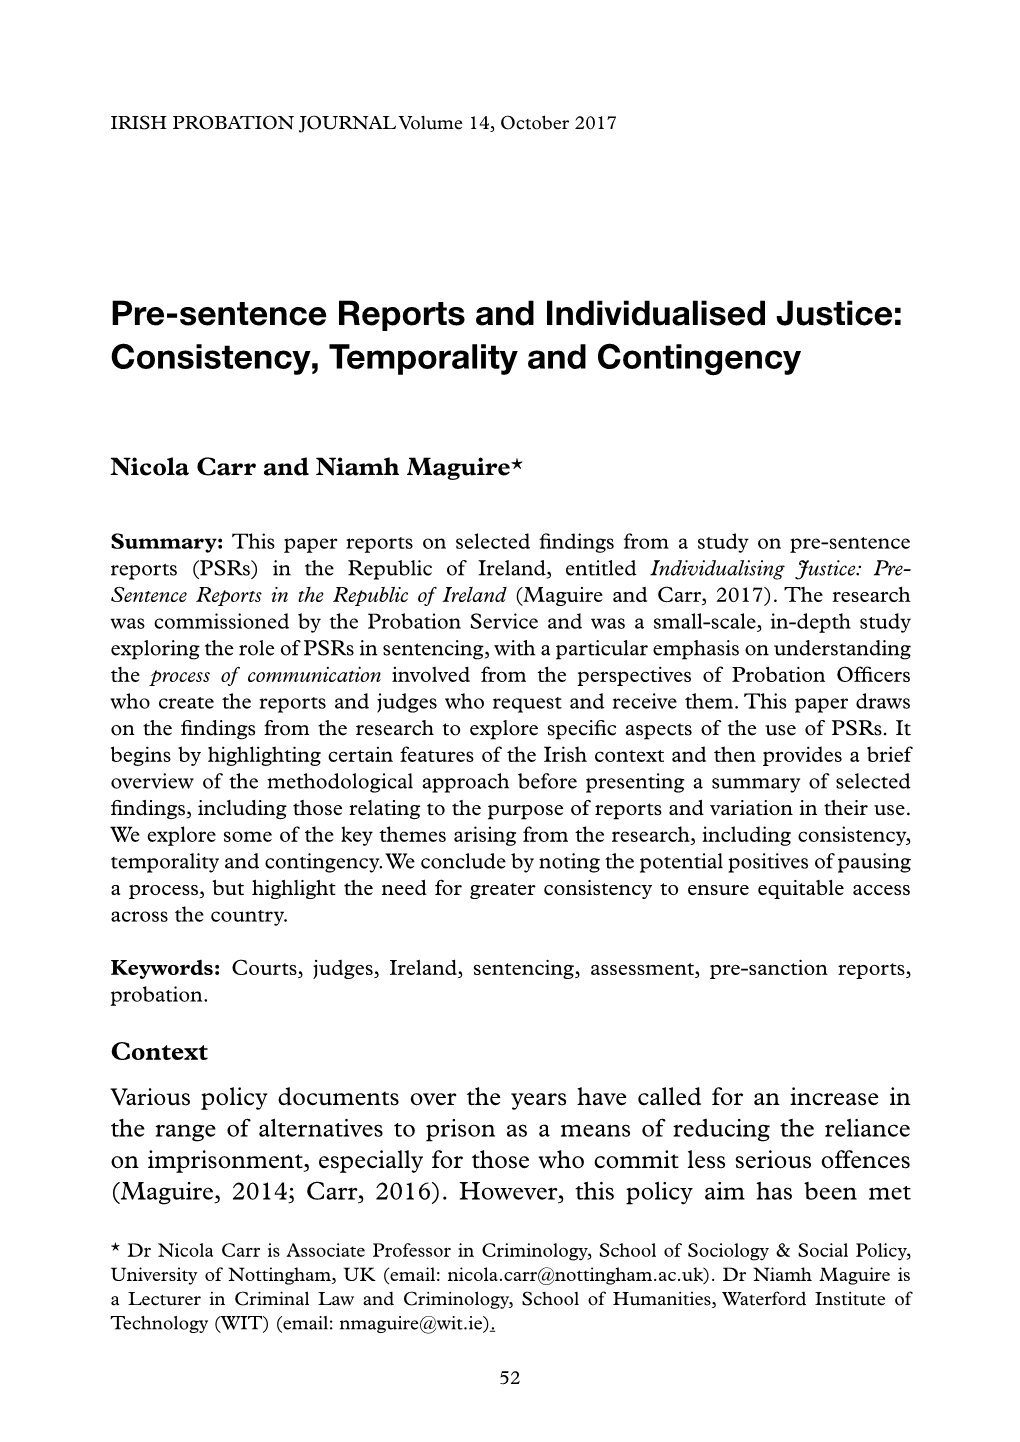 Pre-Sentence Reports and Individualised Justice: Consistency, Temporality and Contingency